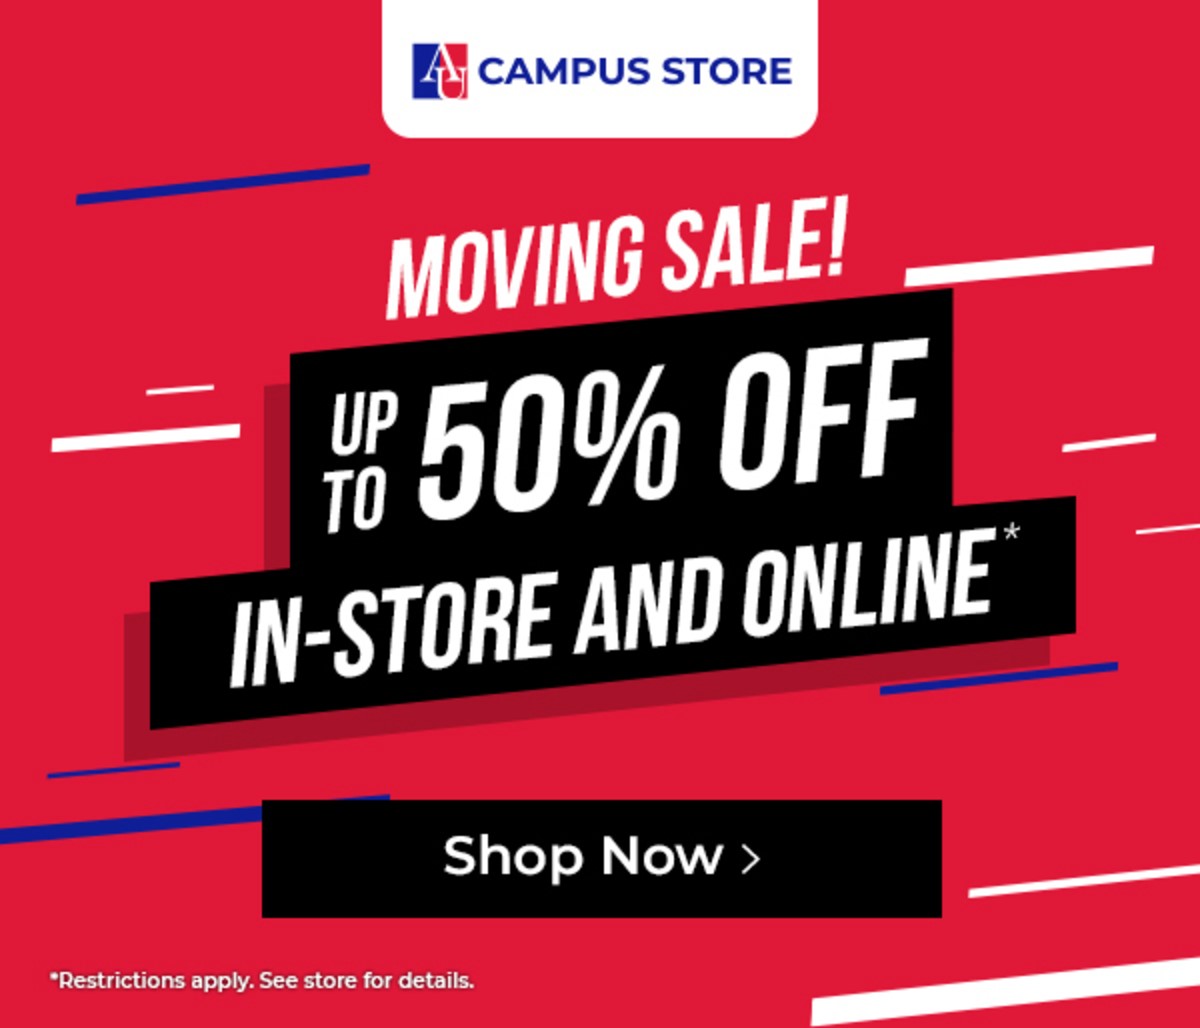 Campus Store moving sale: Up to 50% off in-store and online